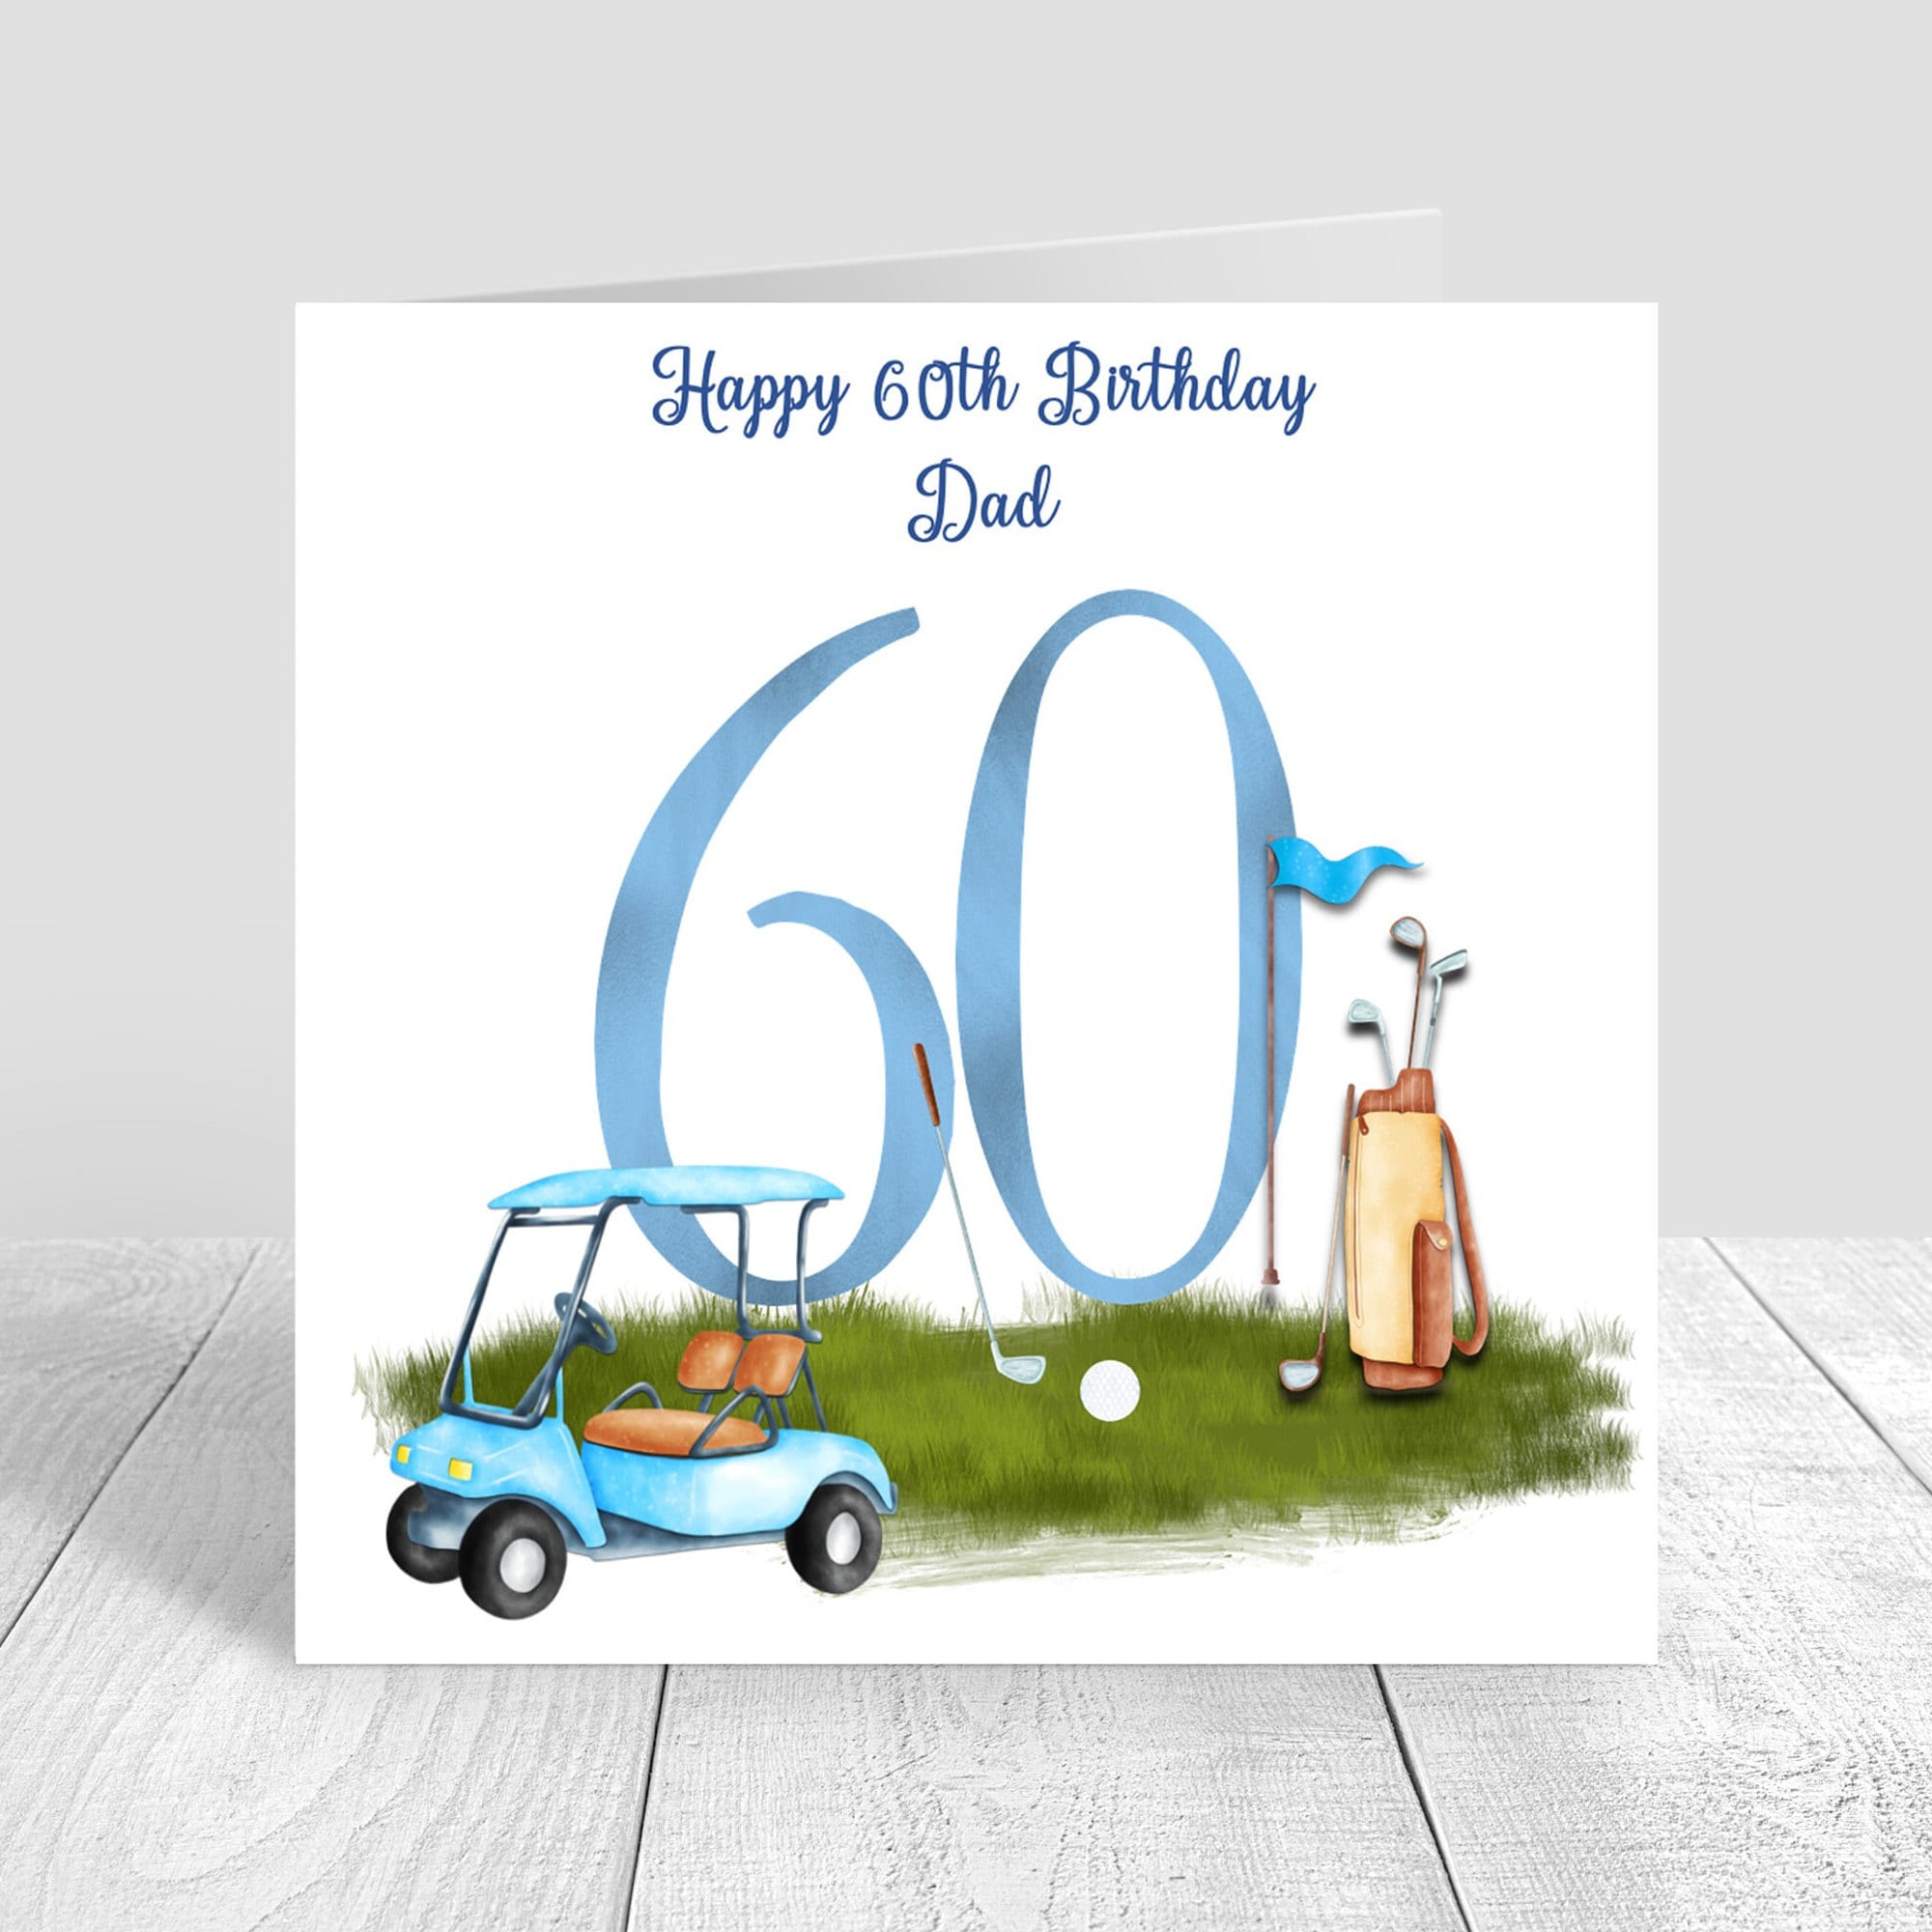 Funny 60th Birthday Card, Big Back in 1963 Birthday Card for Boyfriend, 60th Wedding Anniversary Card Gifts for Parents Couple, 10.6x7.8 inch